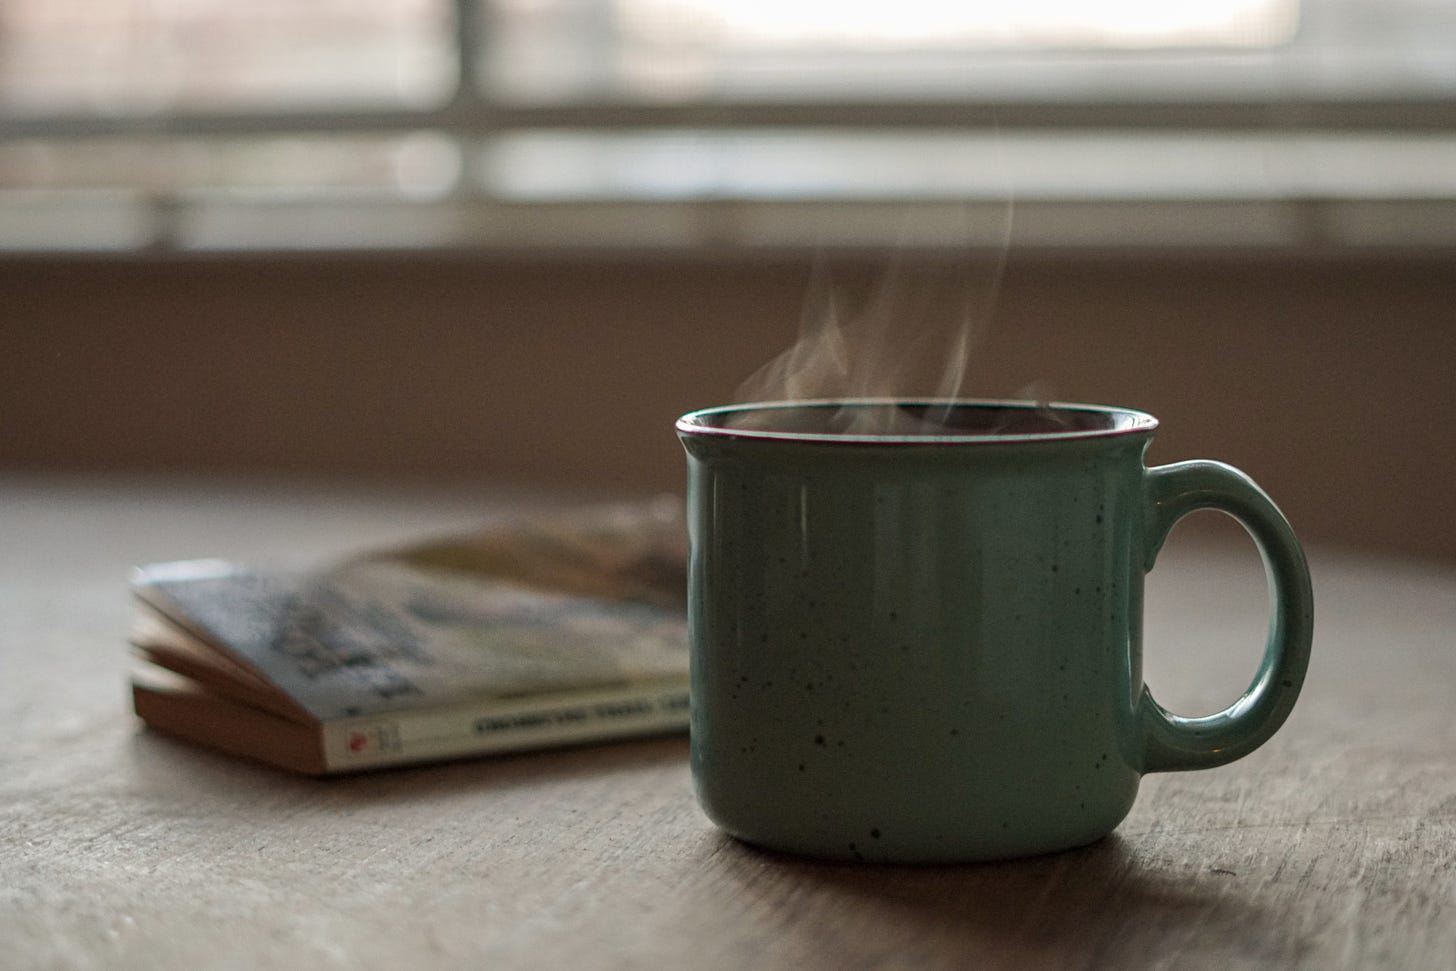 A steaming mug of coffee and a book by a window.